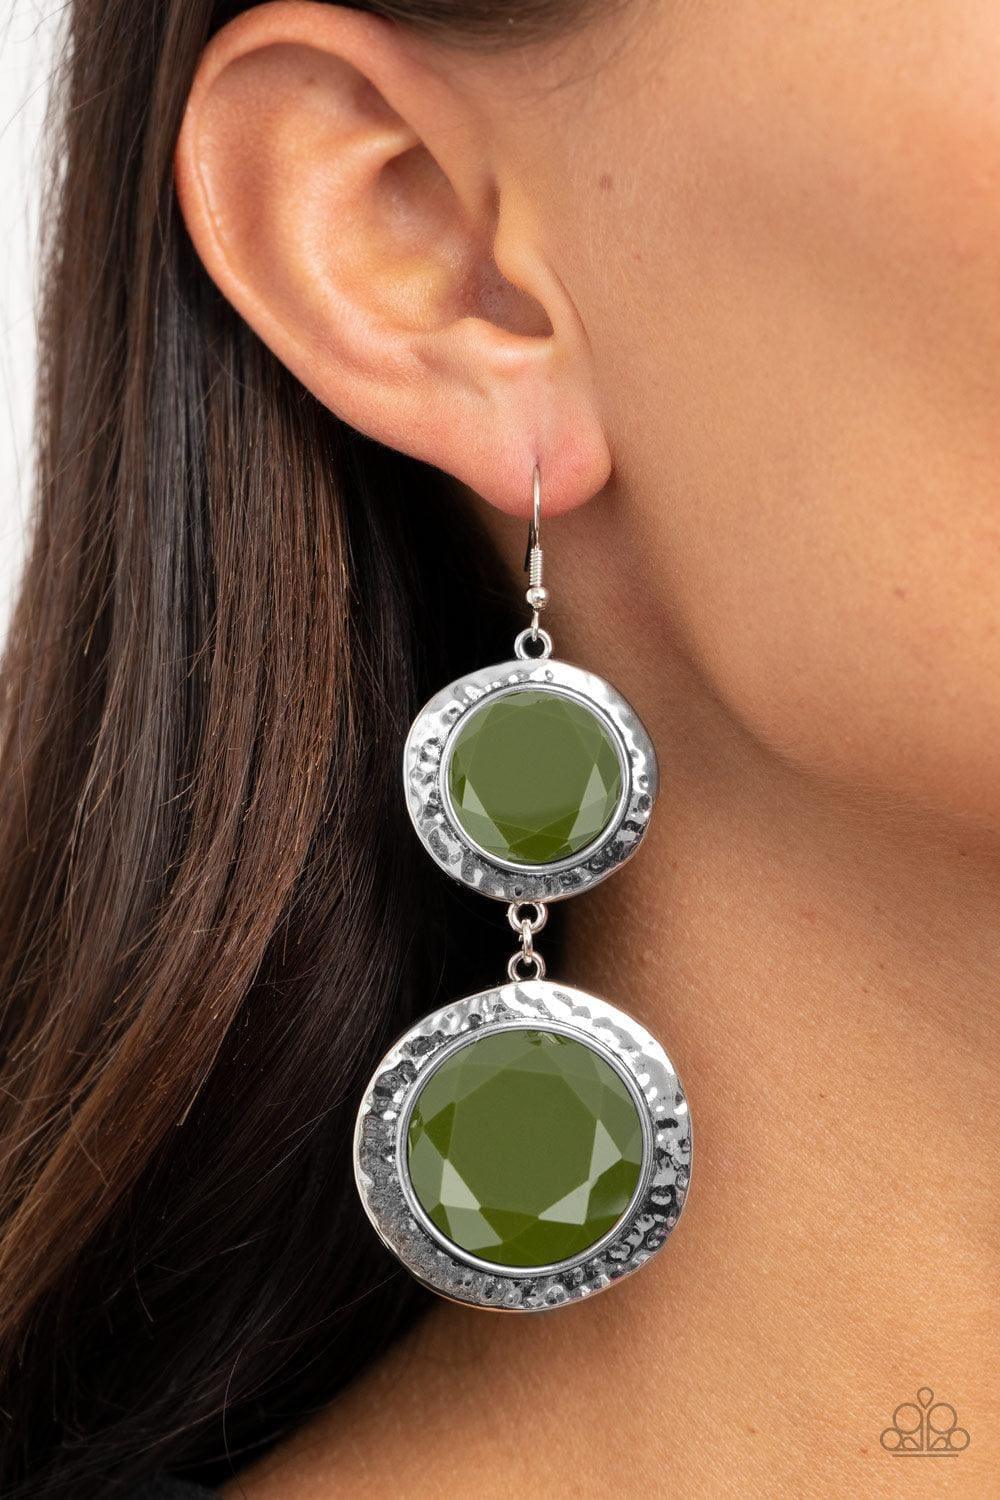 Paparazzi Accessories - Thrift Shop Stop - Green Earrings - Bling by JessieK